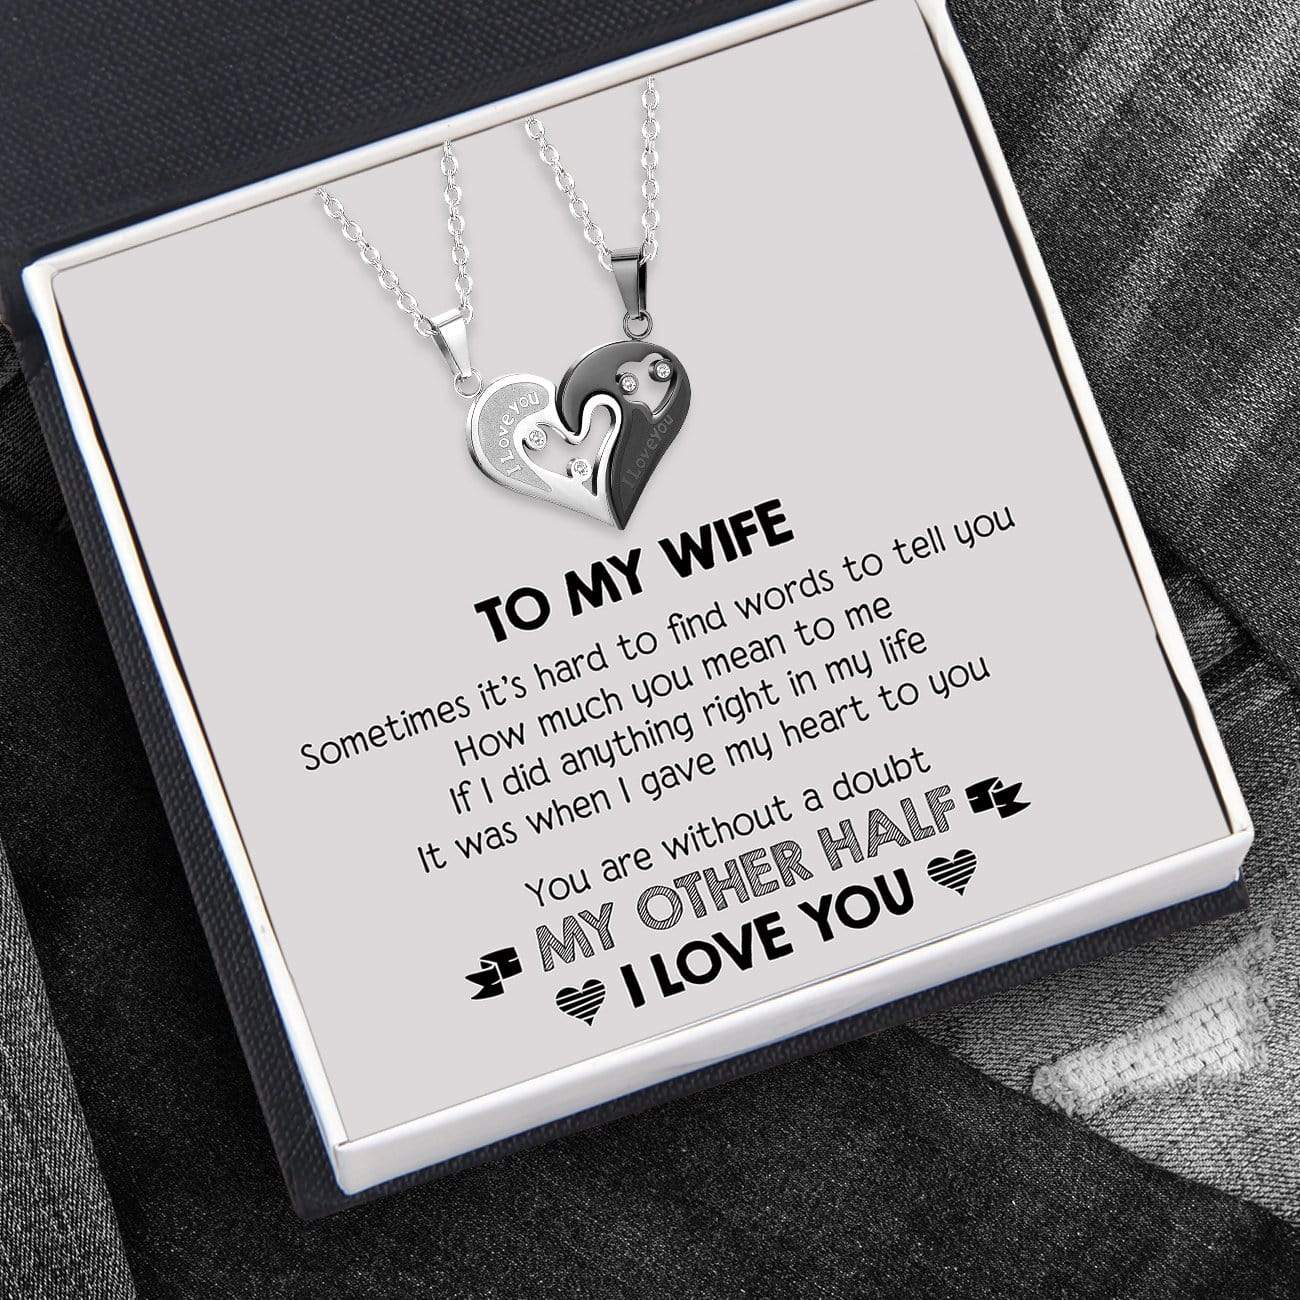 Couple Heart Necklaces - To My Wife - How Much You Mean To Me - Glt15003